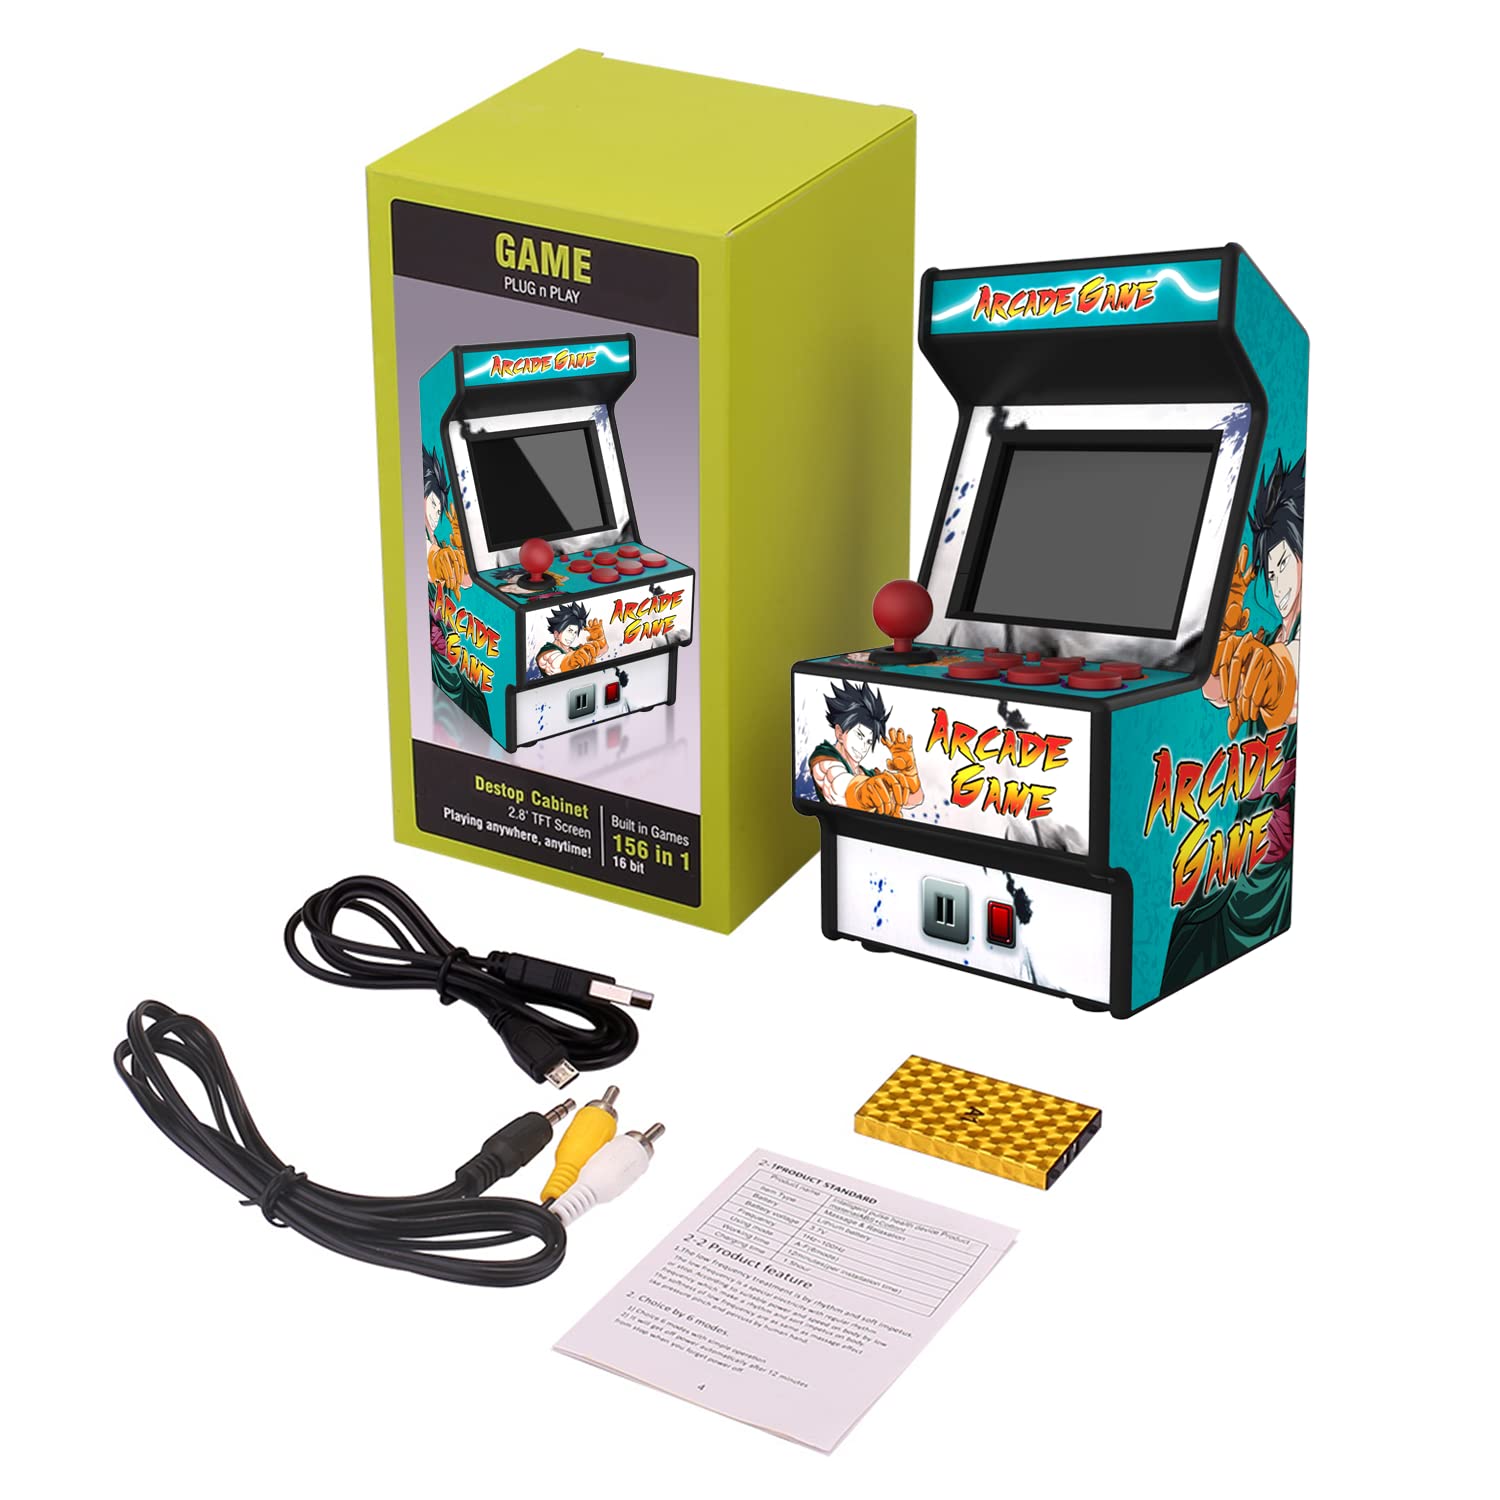 Golden Security Retro Mini Arcade Machine, Handheld Game Console with 156 Classic Video Games 2.8 Inch Color Display Rechargeable Battery, Support for TV Output, Birthday Present for Children